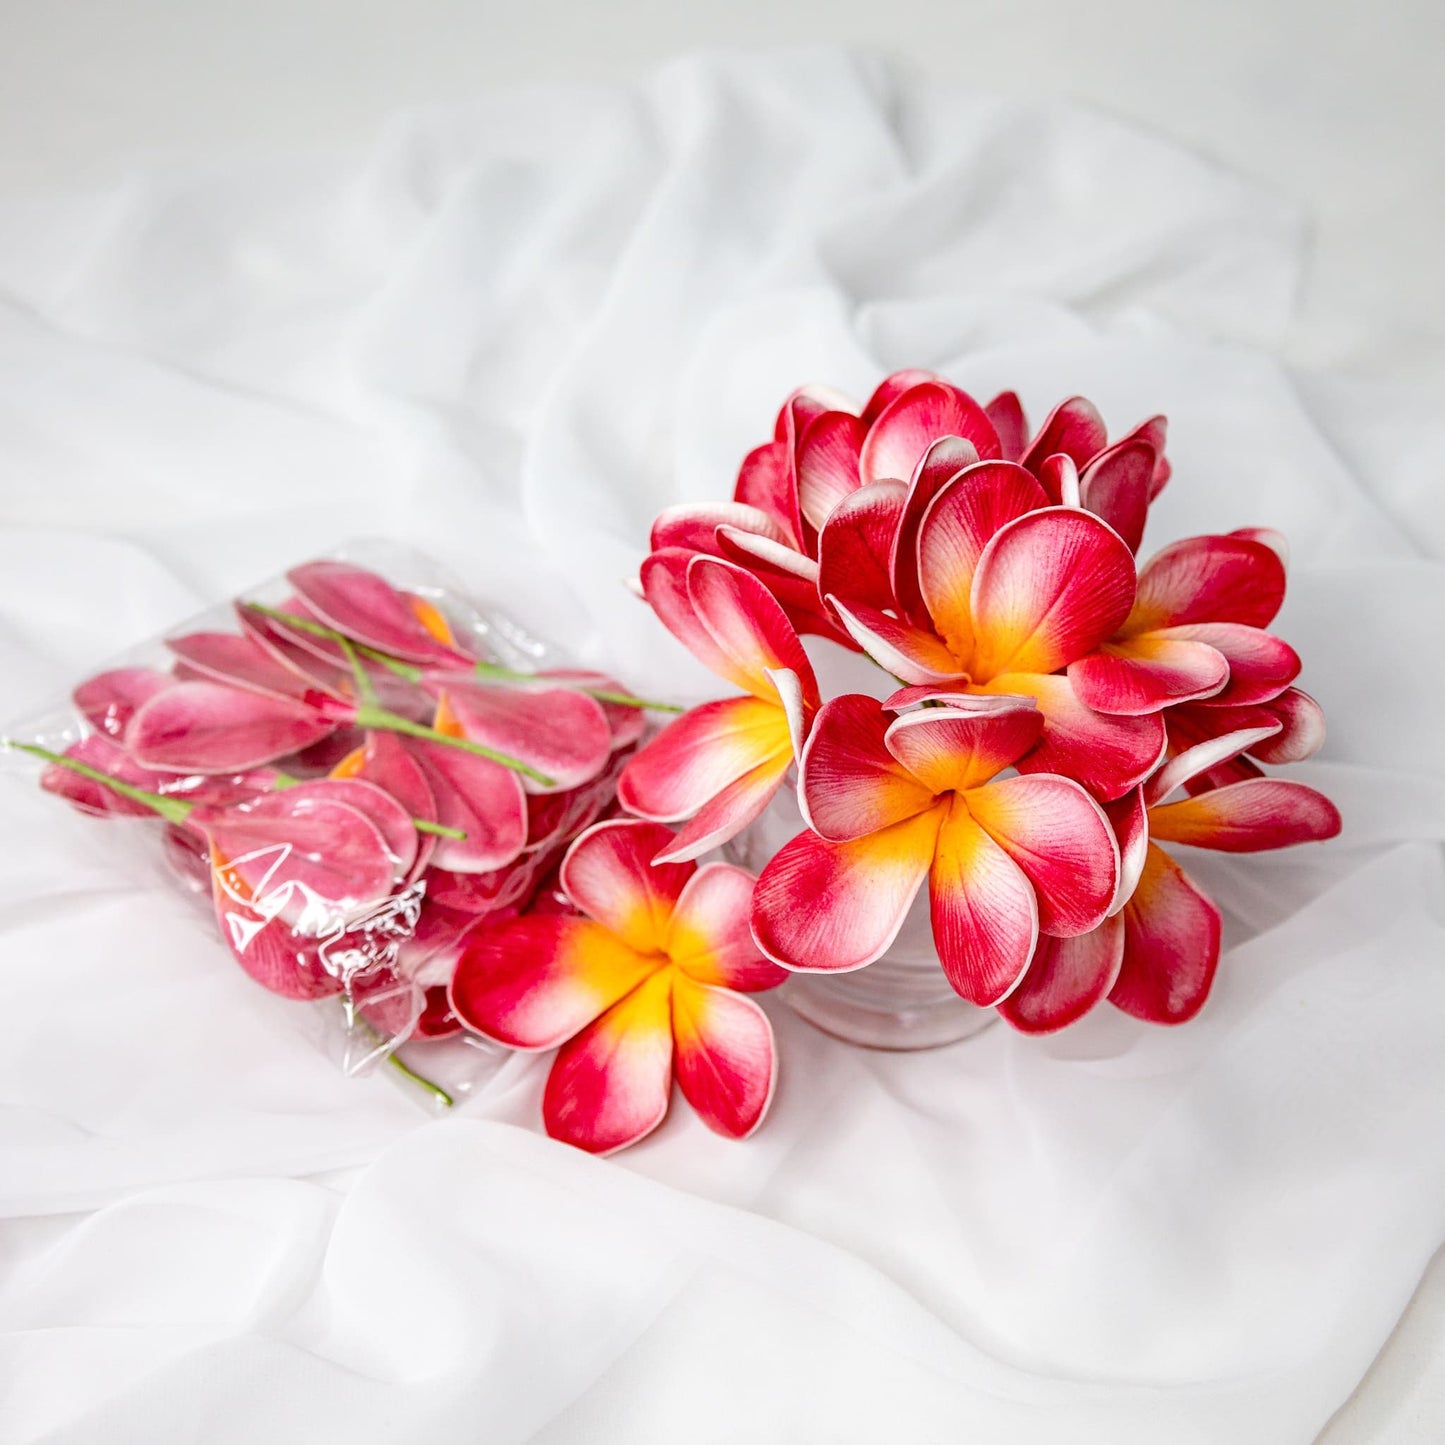 artificial red orange frangipani flowers placed in transparent glass vase